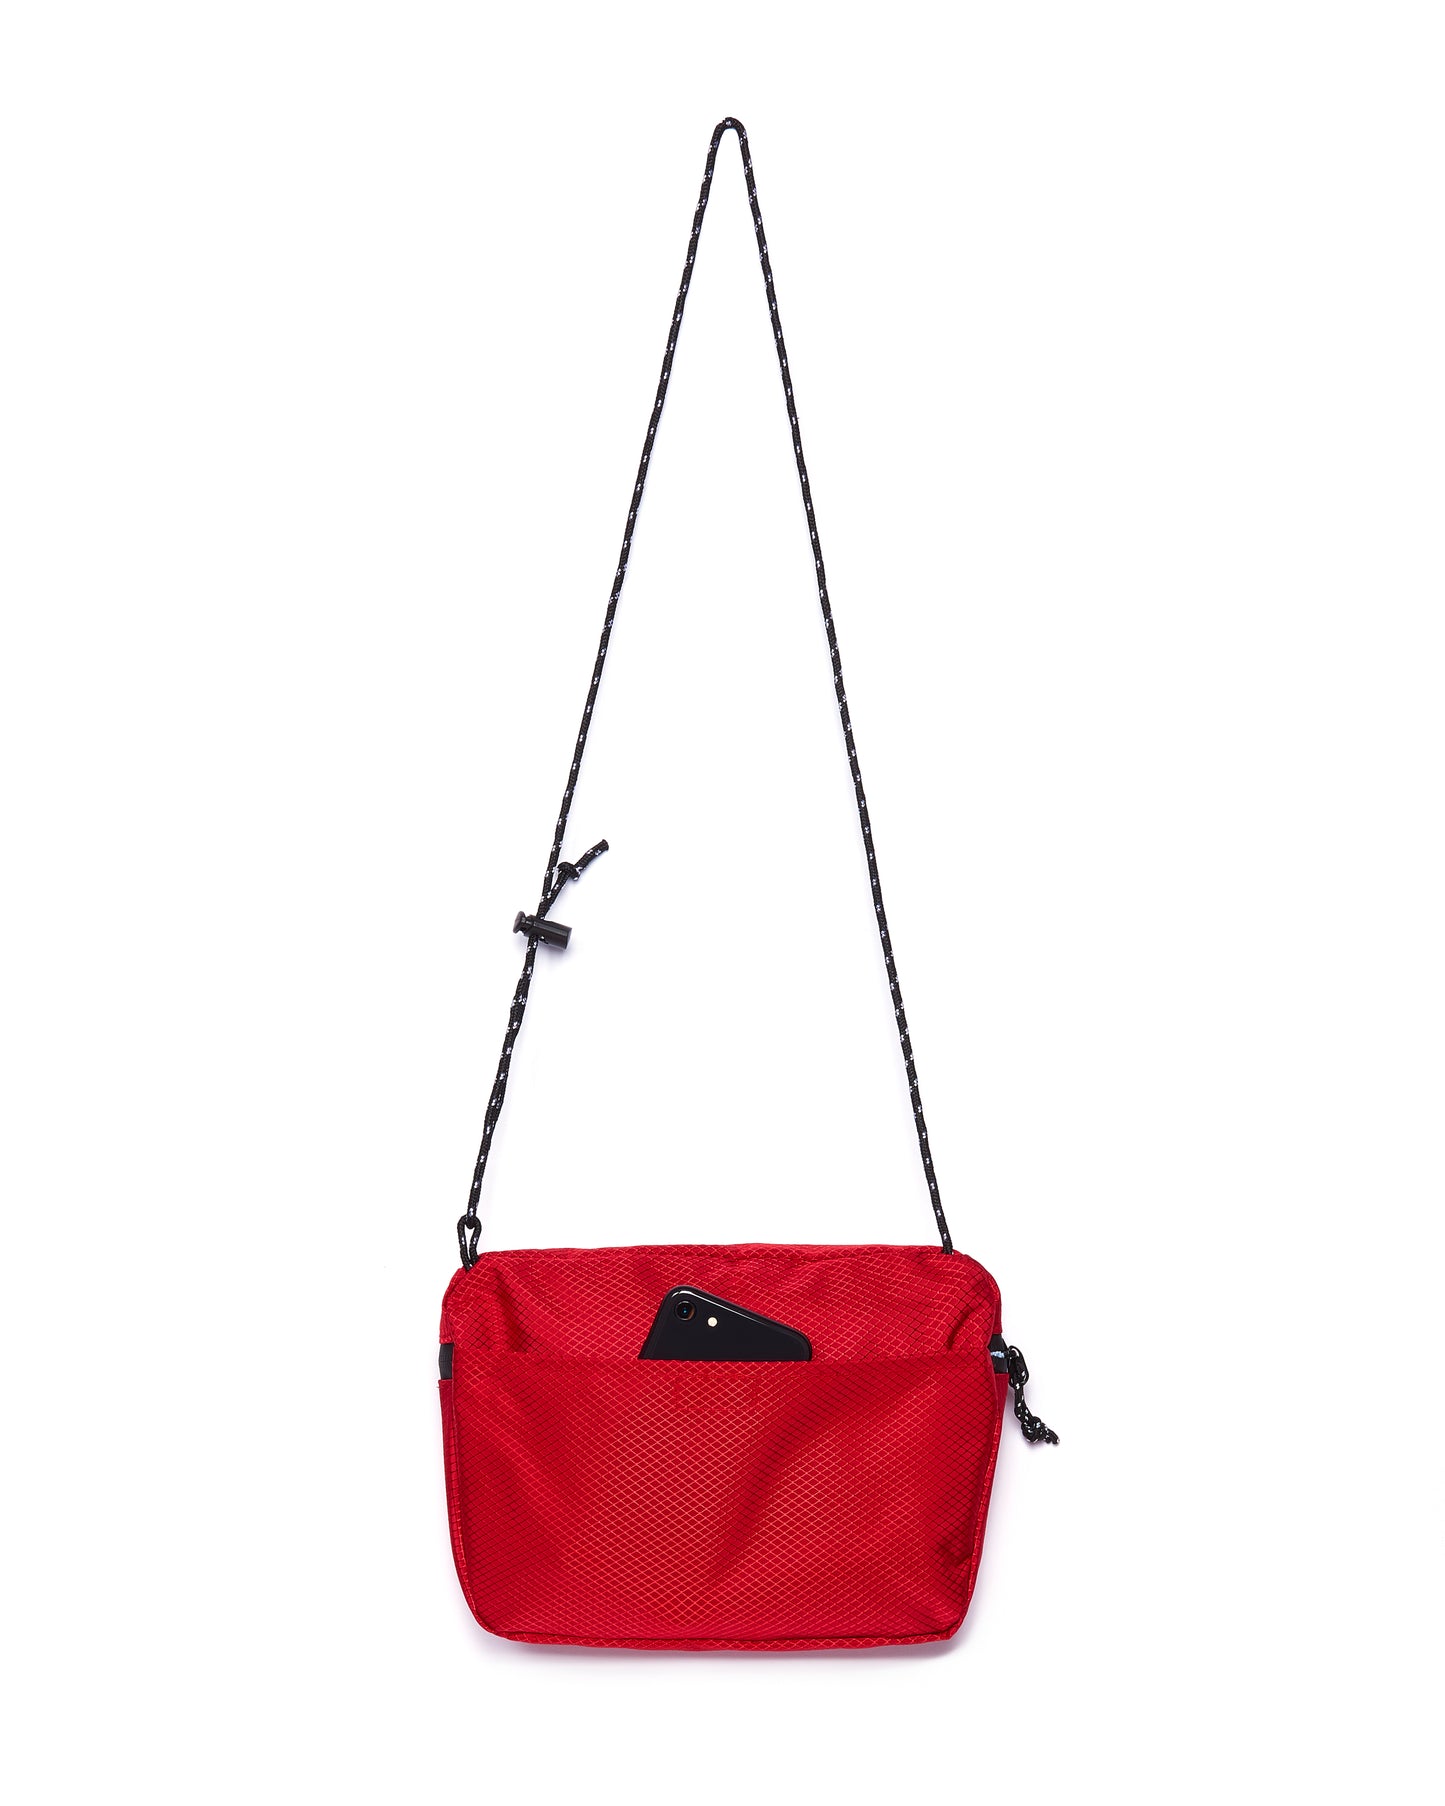 THE CARRY (RED/BLACK)